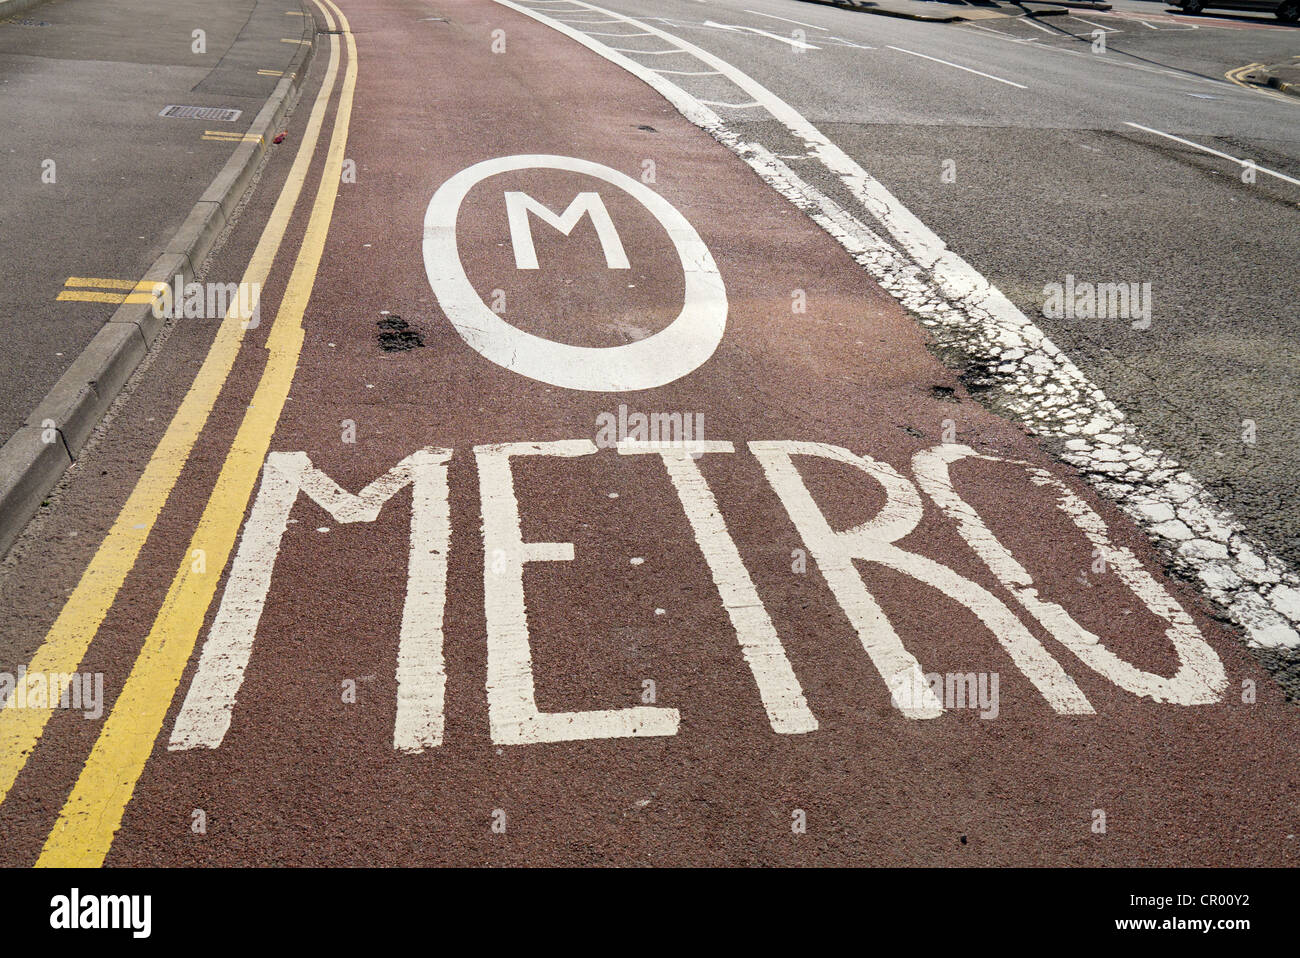 Metro sign in a road lane for the ftrmetro in Swansea, Stock Photo